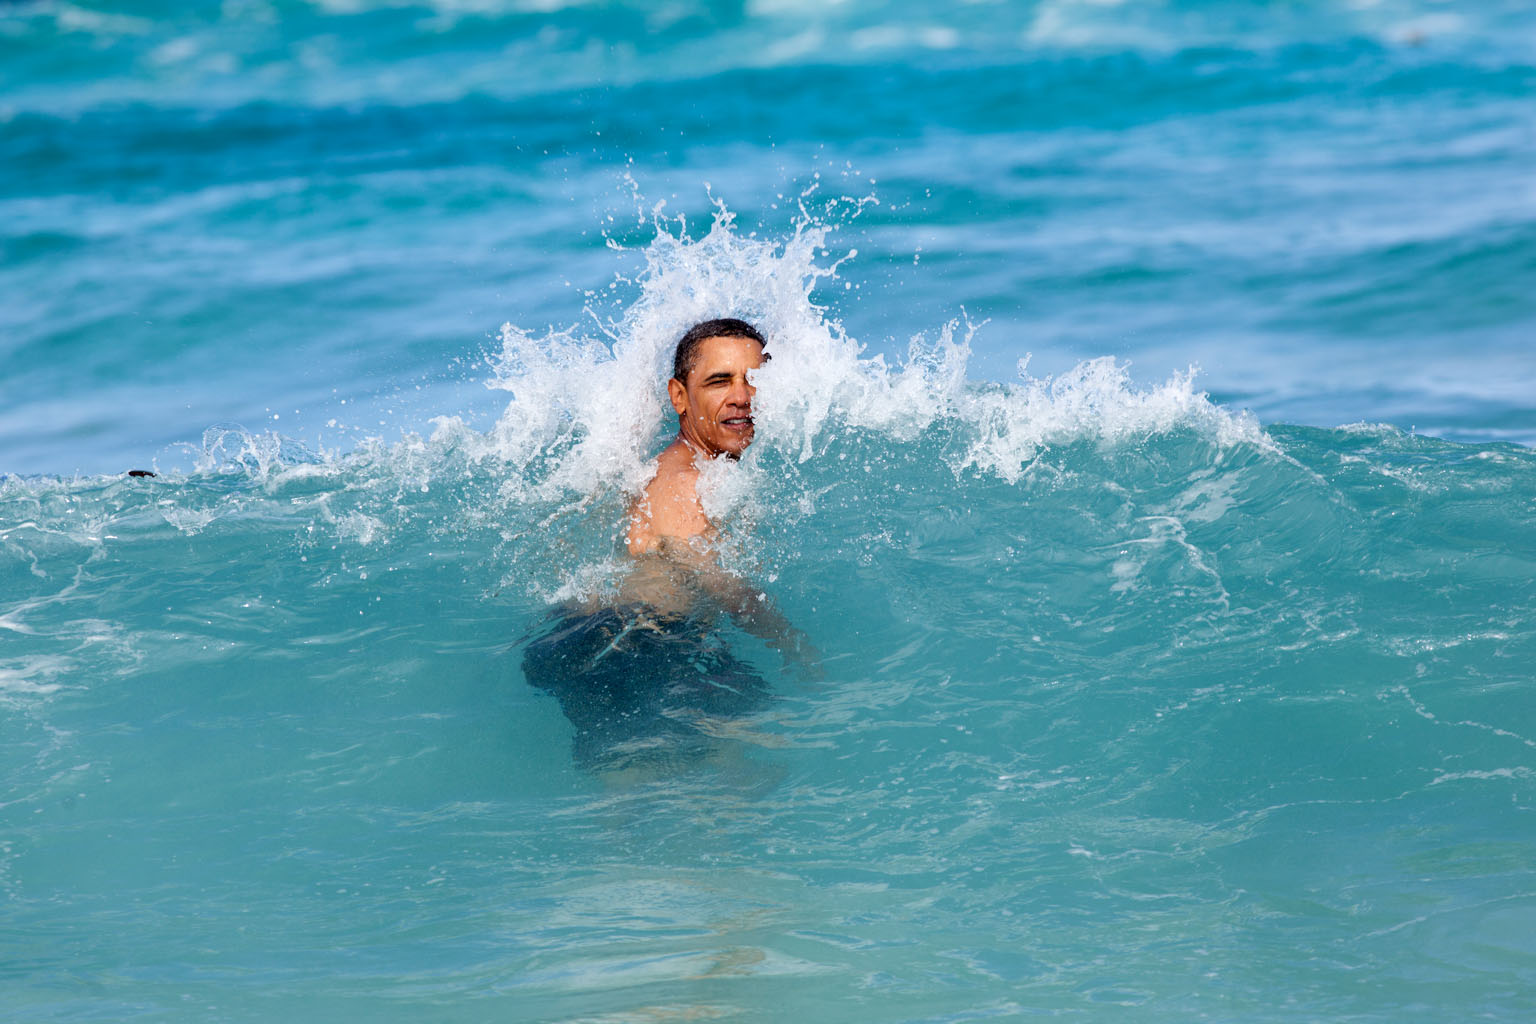 United States President Barack Obama swimming at Pyramid Rock Beach in Kaneohe Bay on New Year’s Day, 2012, during his annual Christmas holiday with family and friends. PHOTO: Official White House image via Wikimedia Commons